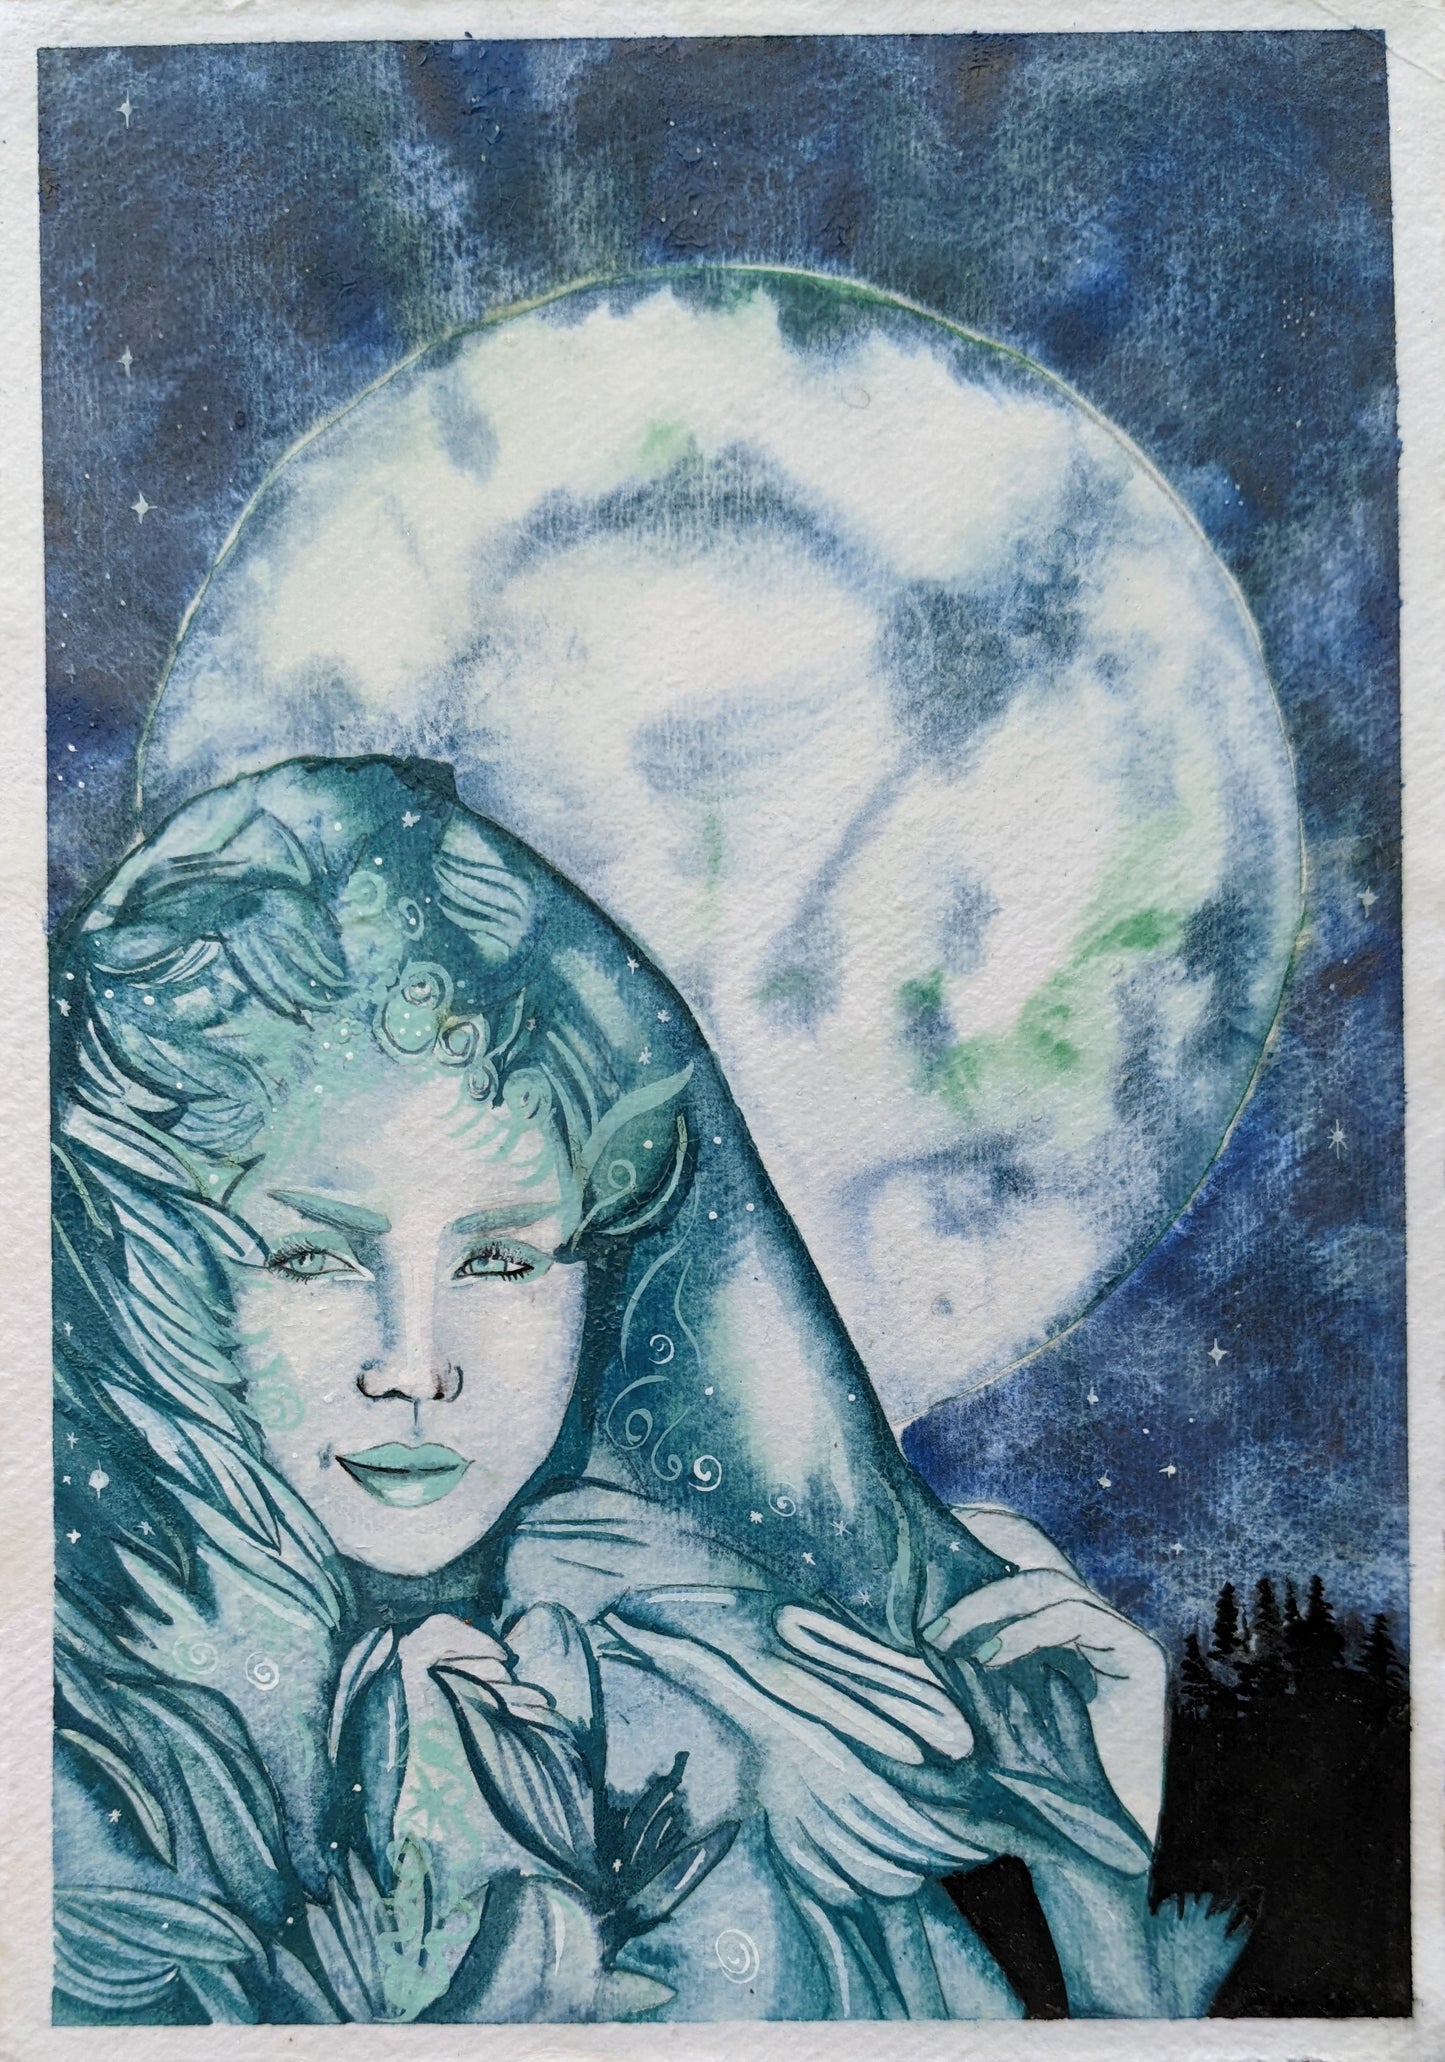 Middlesbrough artist Dianne Bowell offers this stunning, illustrative full moon image.The Snow Queen, an original painting based on the original story by hans christian anderson, and illustrative image with a full moon